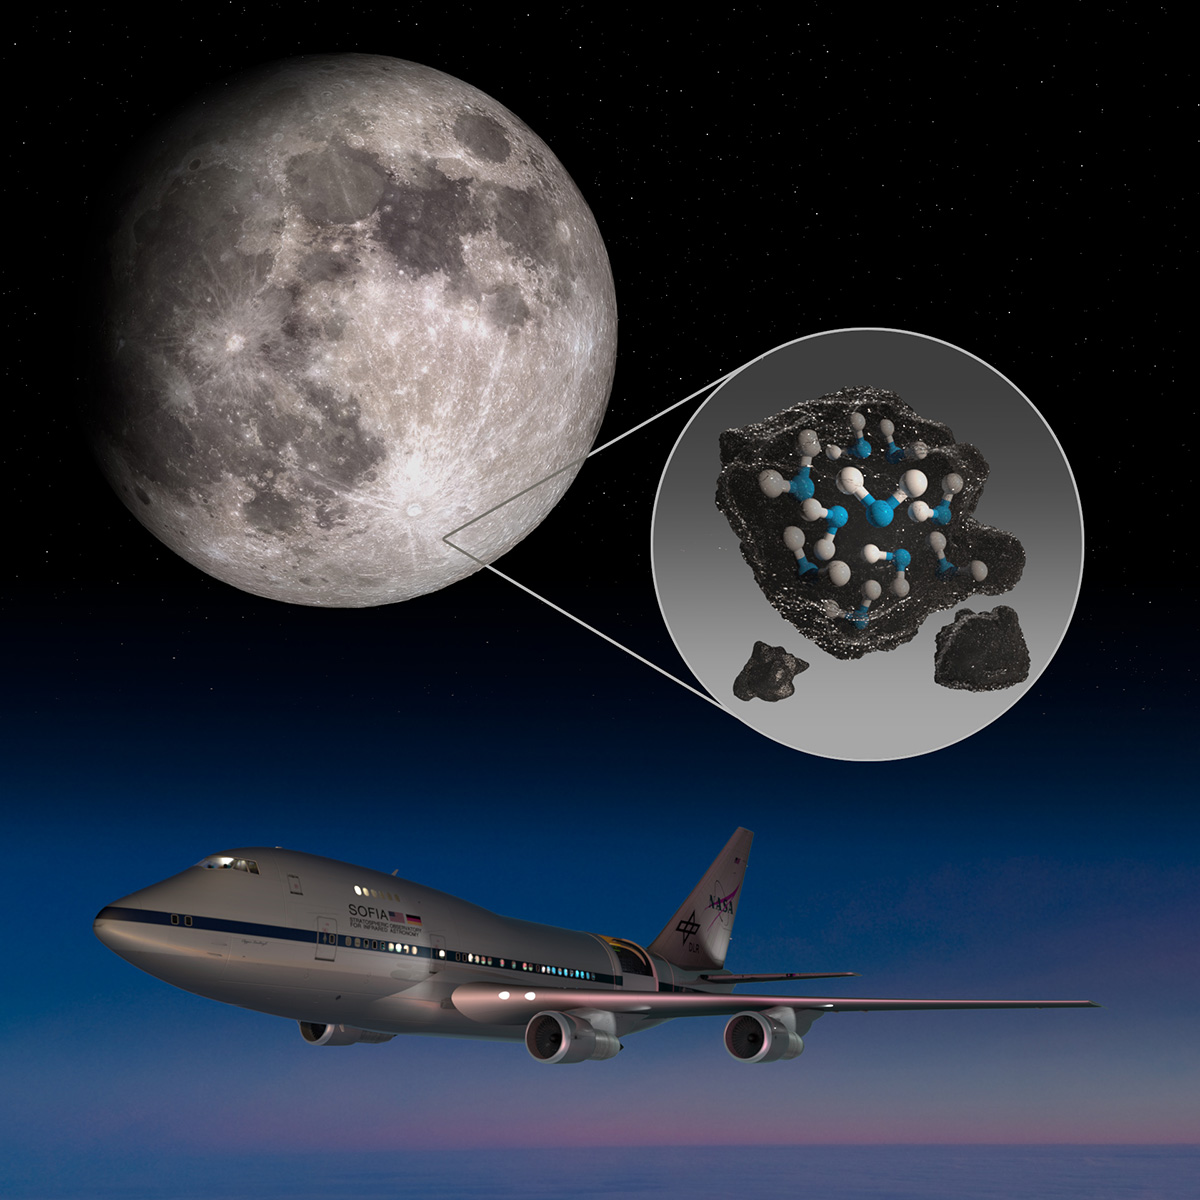 Composite illustration and photo of an airplane in the sky, and the Moon, and visualization of water molecule embedded in a rock.